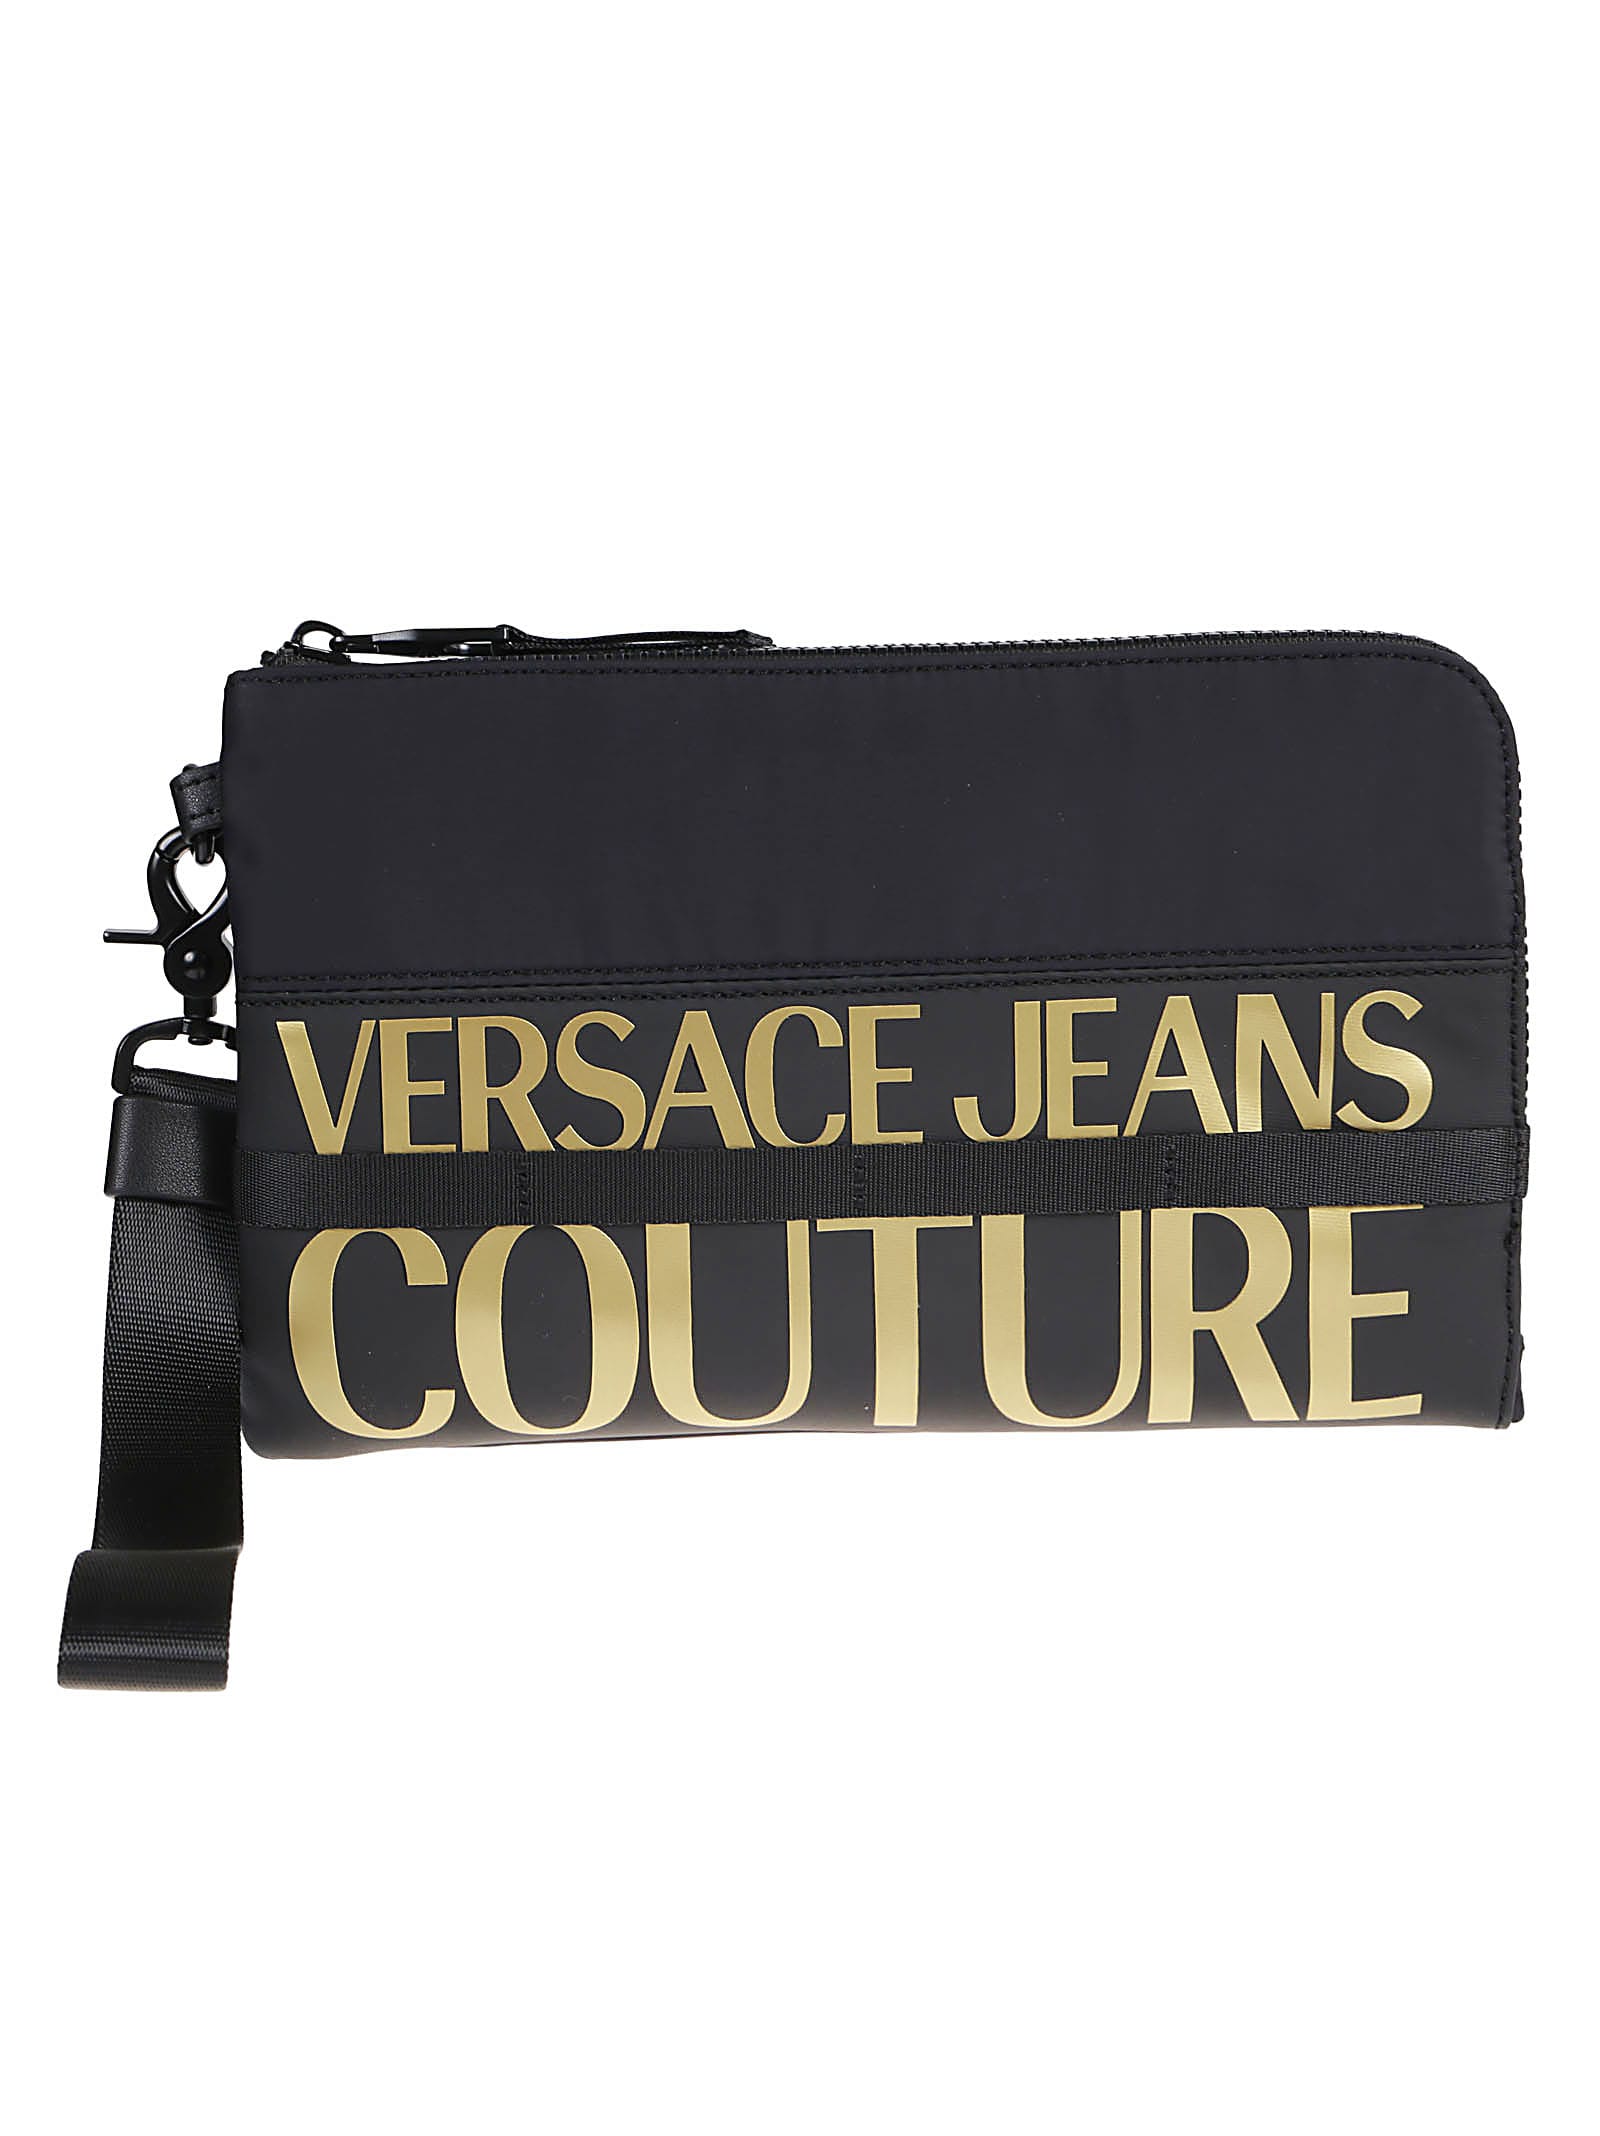 Versace Jeans Couture Range Logo Couture Sketch 10 Wallet